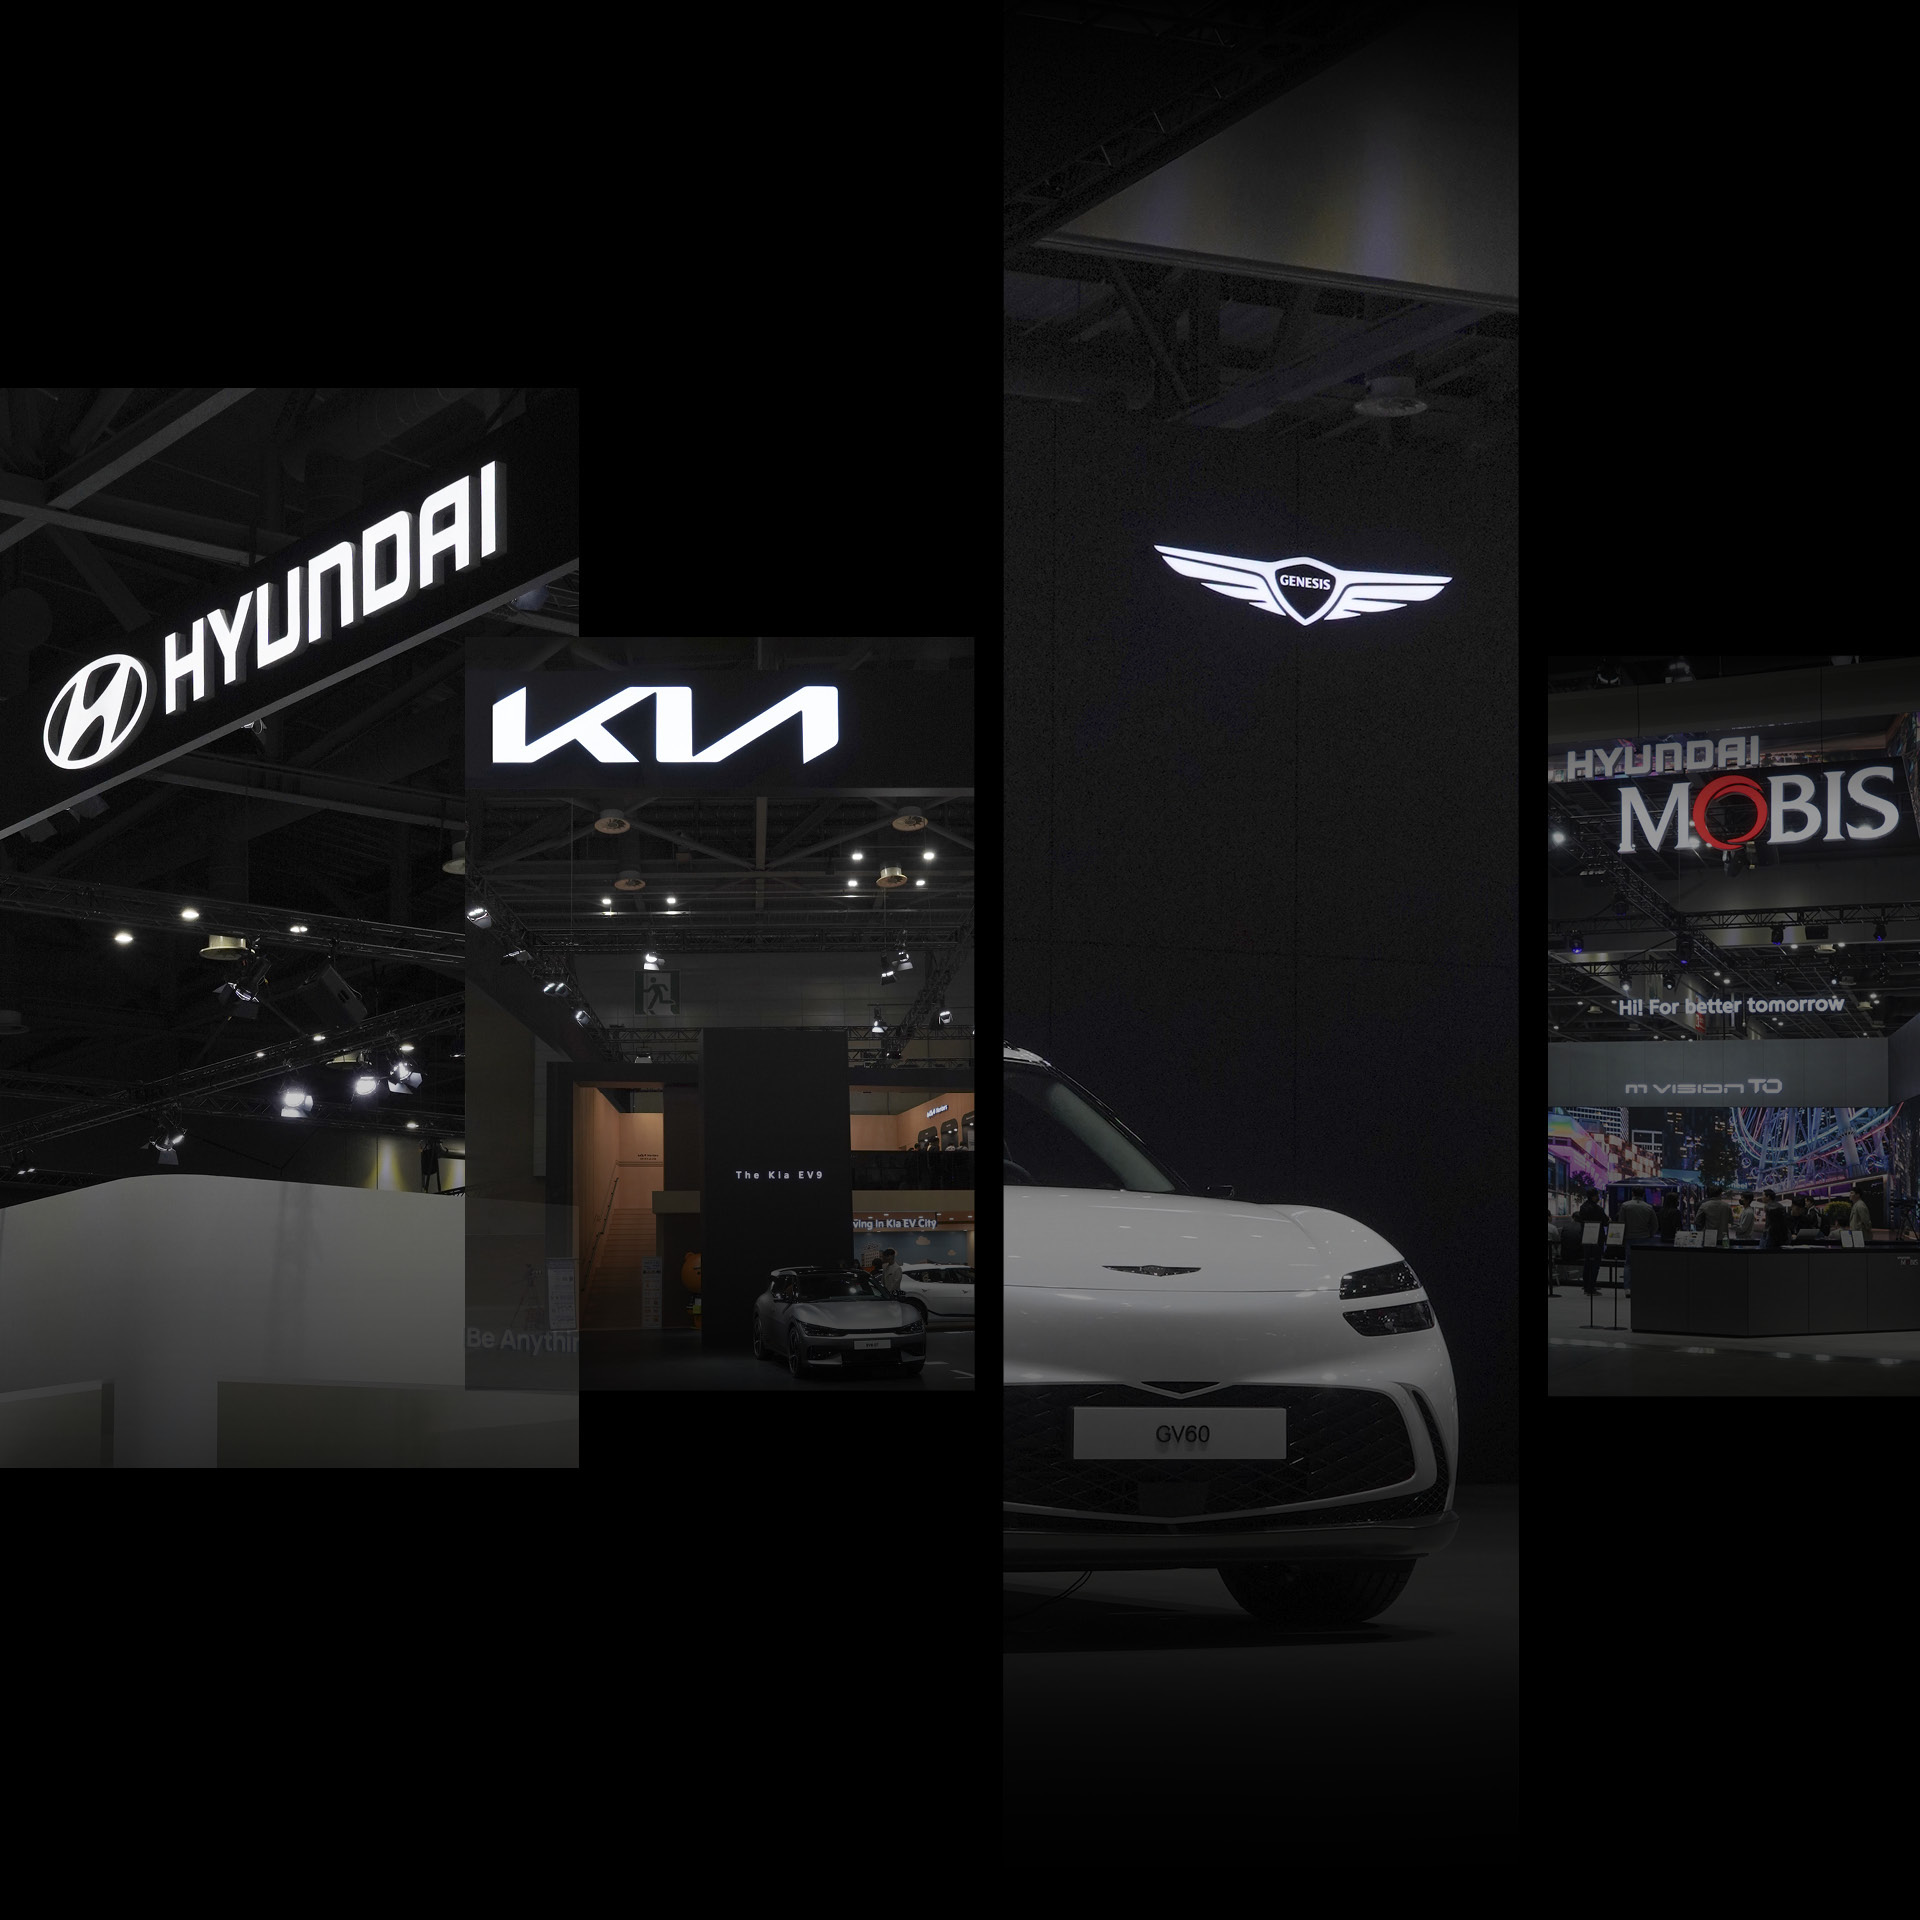 Each brand of Hyundai Motor Group showcased at the Seoul Mobility Show